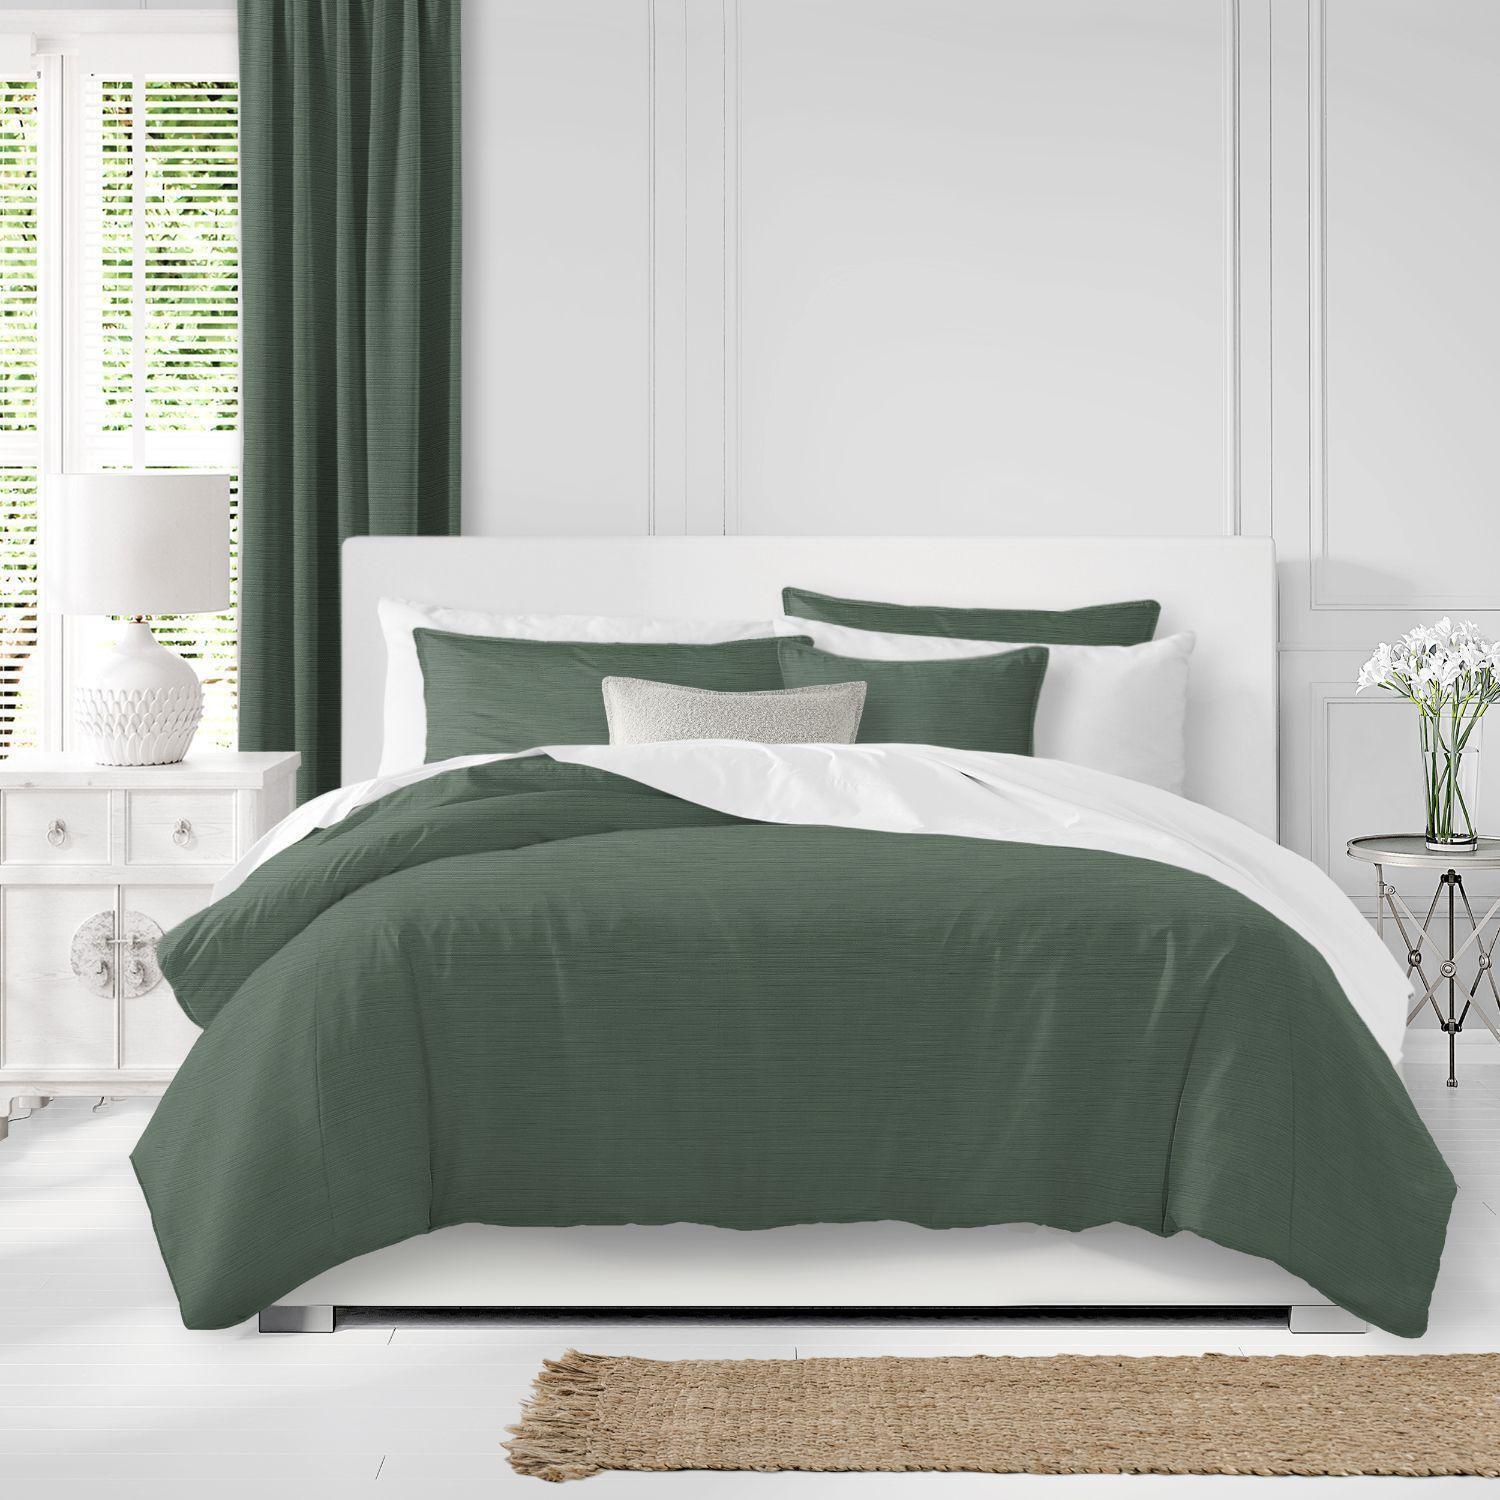 Set of 3 Green Solid Comforter with Pillow Shams - Super King Size